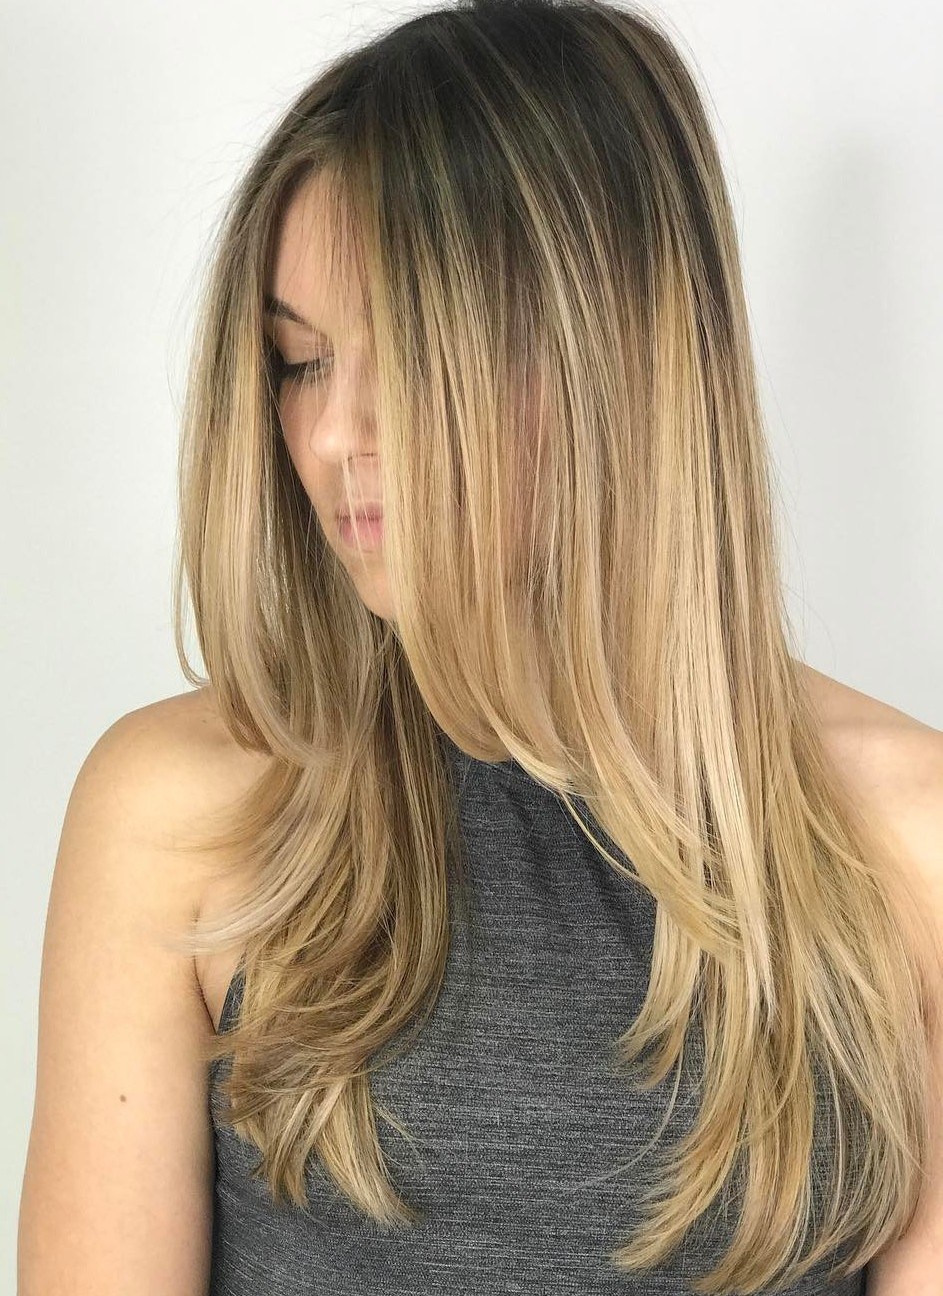 80 Cute Layered Hairstyles and Cuts for Long Hair in 2019